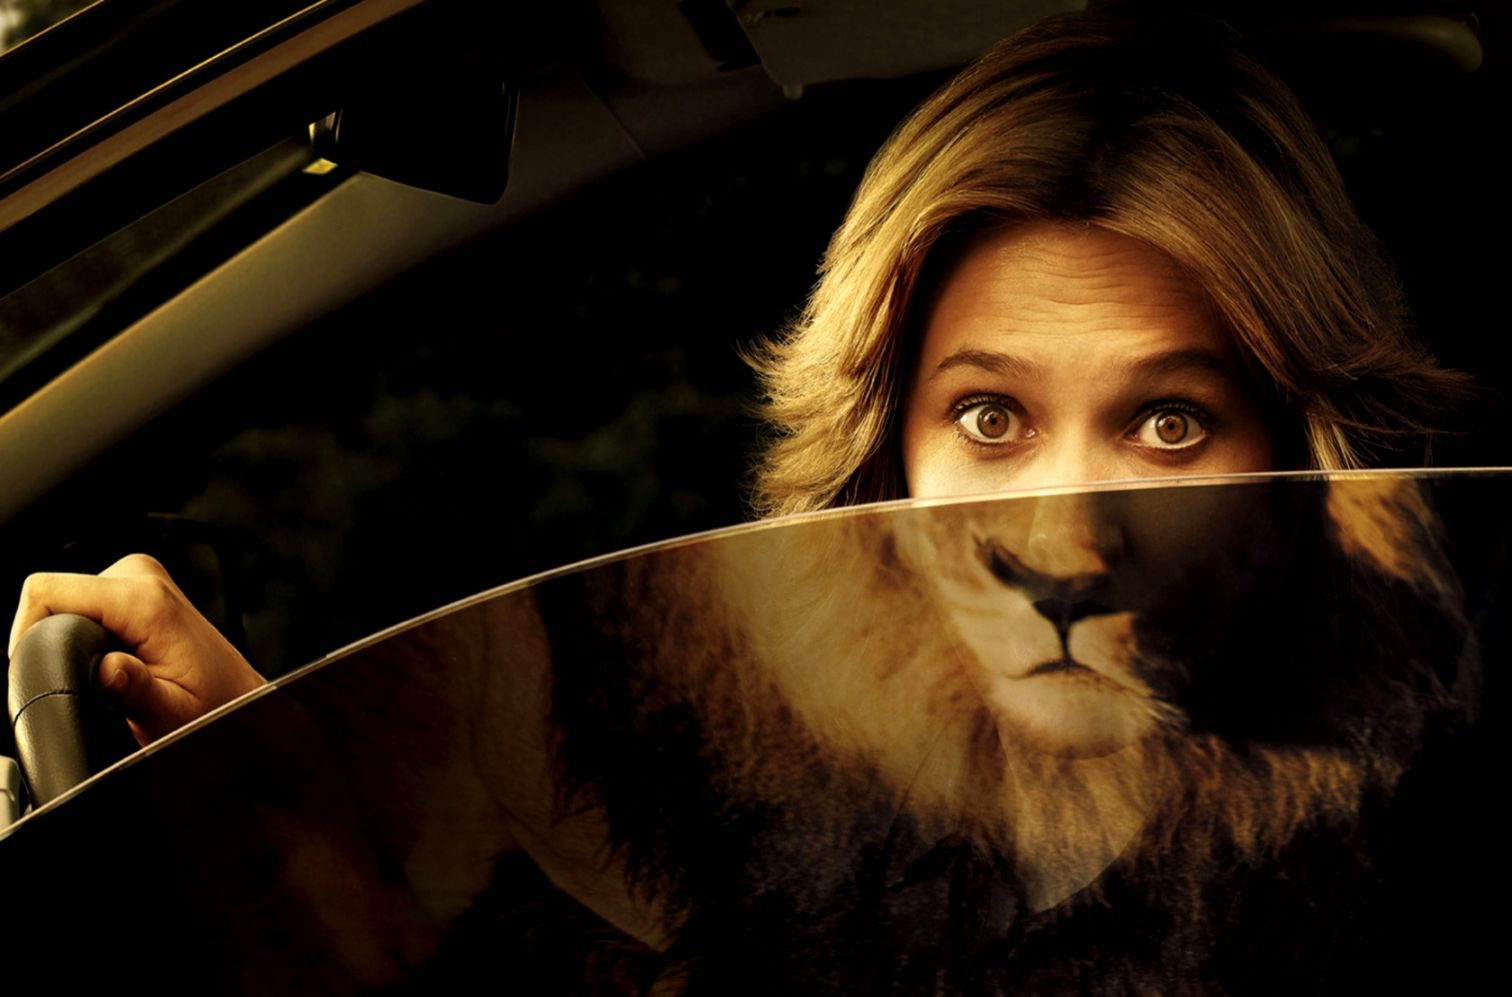 Funny Girl Lion Hd Wallpaper Welcome To Starchop - Very Funny Wallpapers Hd - HD Wallpaper 